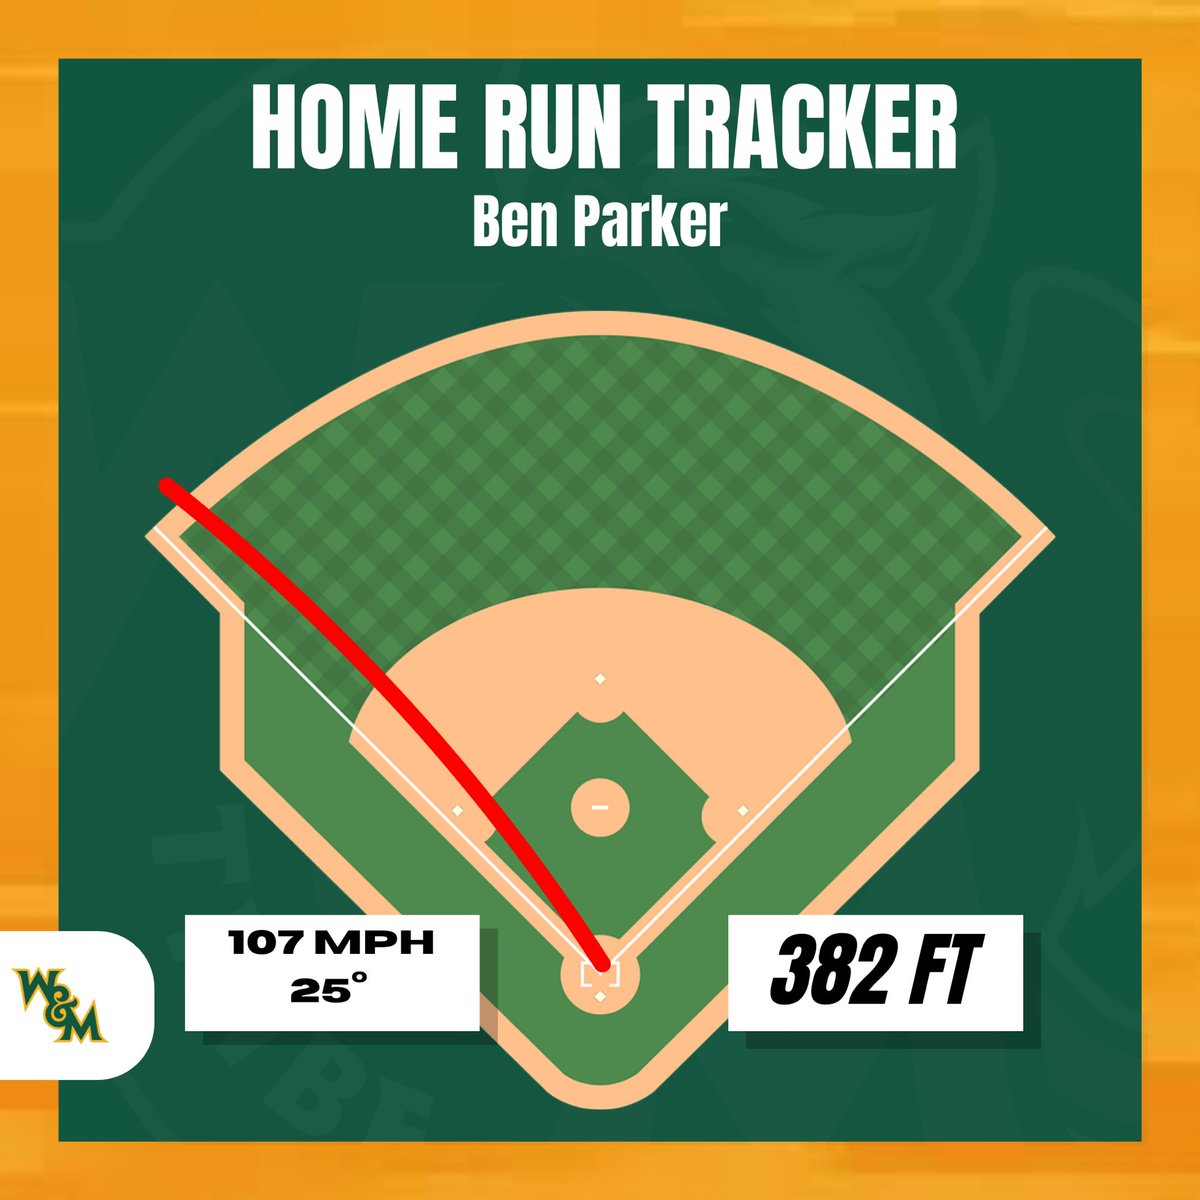 The first of many @parkerb1122 bombs this year.